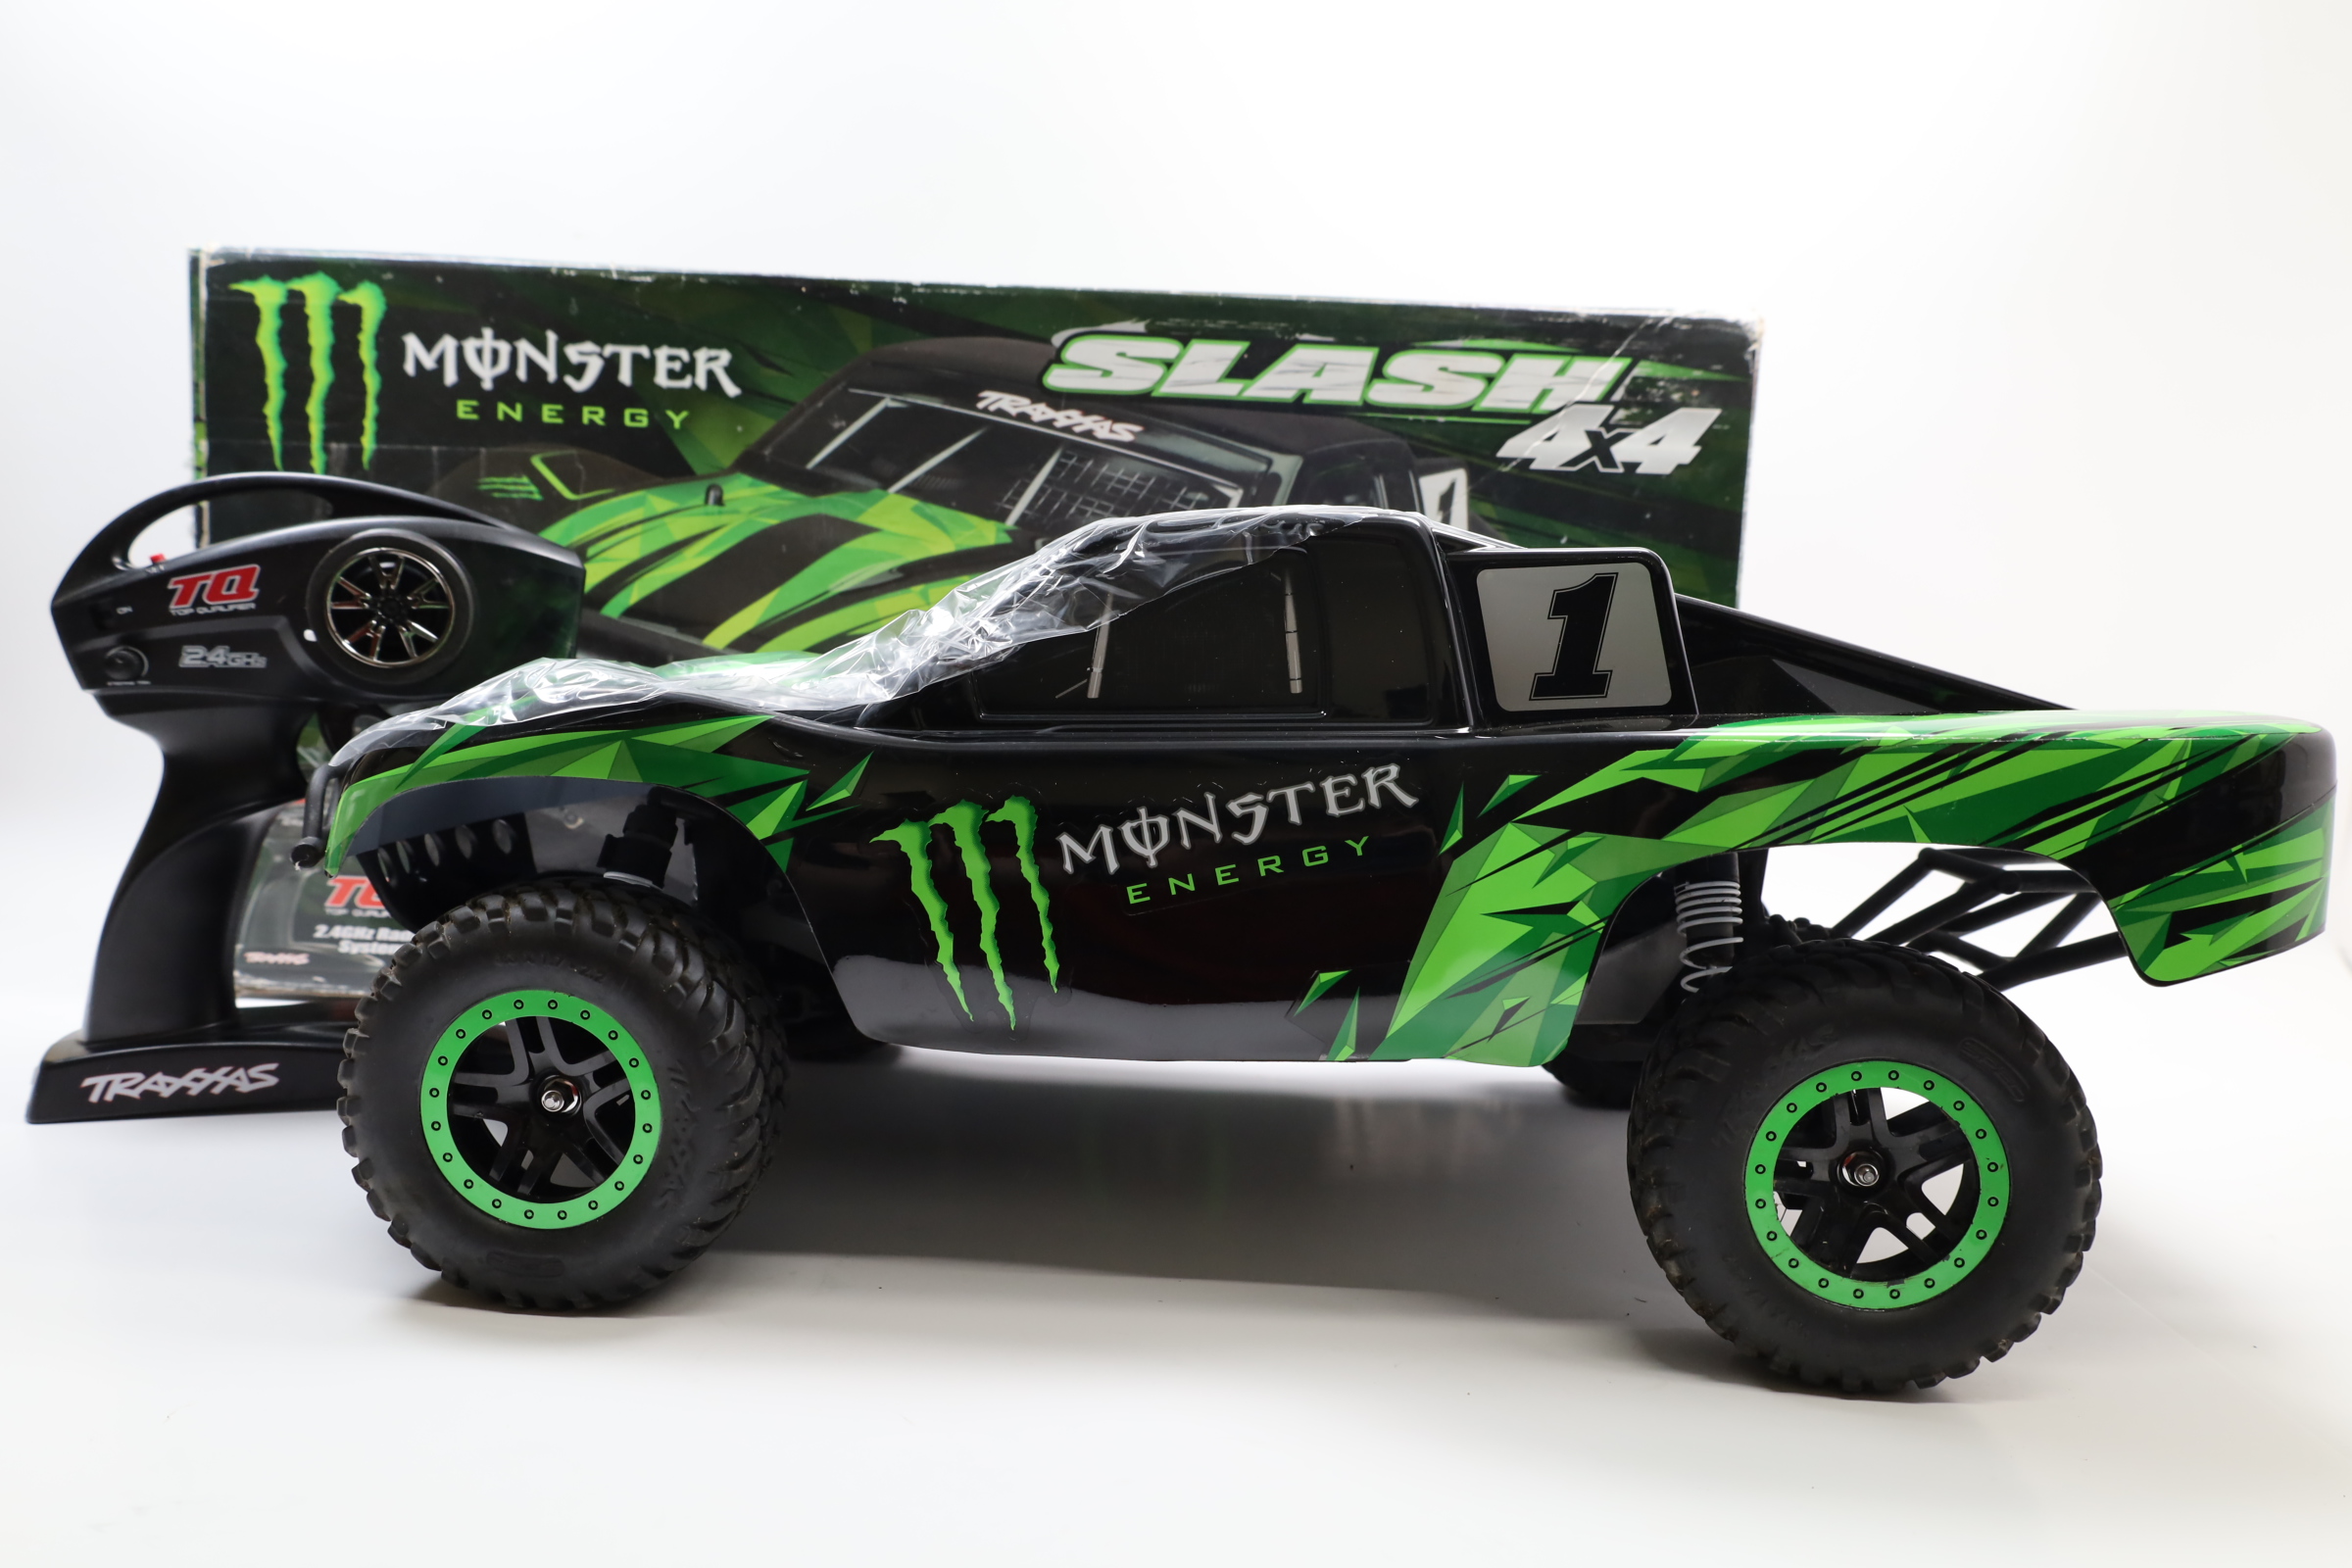 Traxxas Slash 2wd Monster Energy Edition Roller 1/10 Chassis Rc Truck